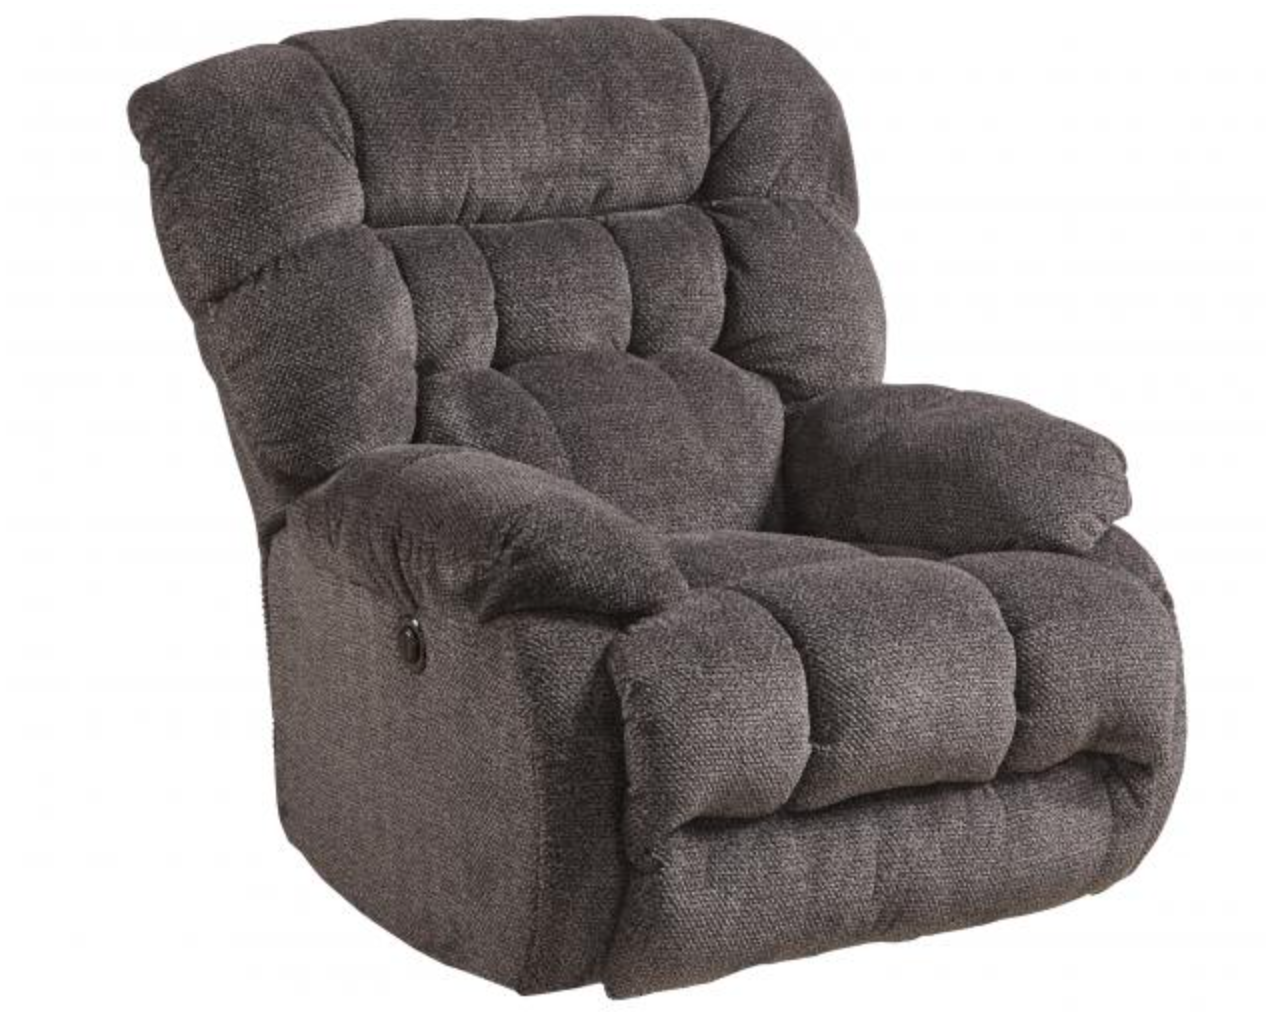 WEEKLY or MONTHLY. Daly's Comfort Chocolate POWER Recliner